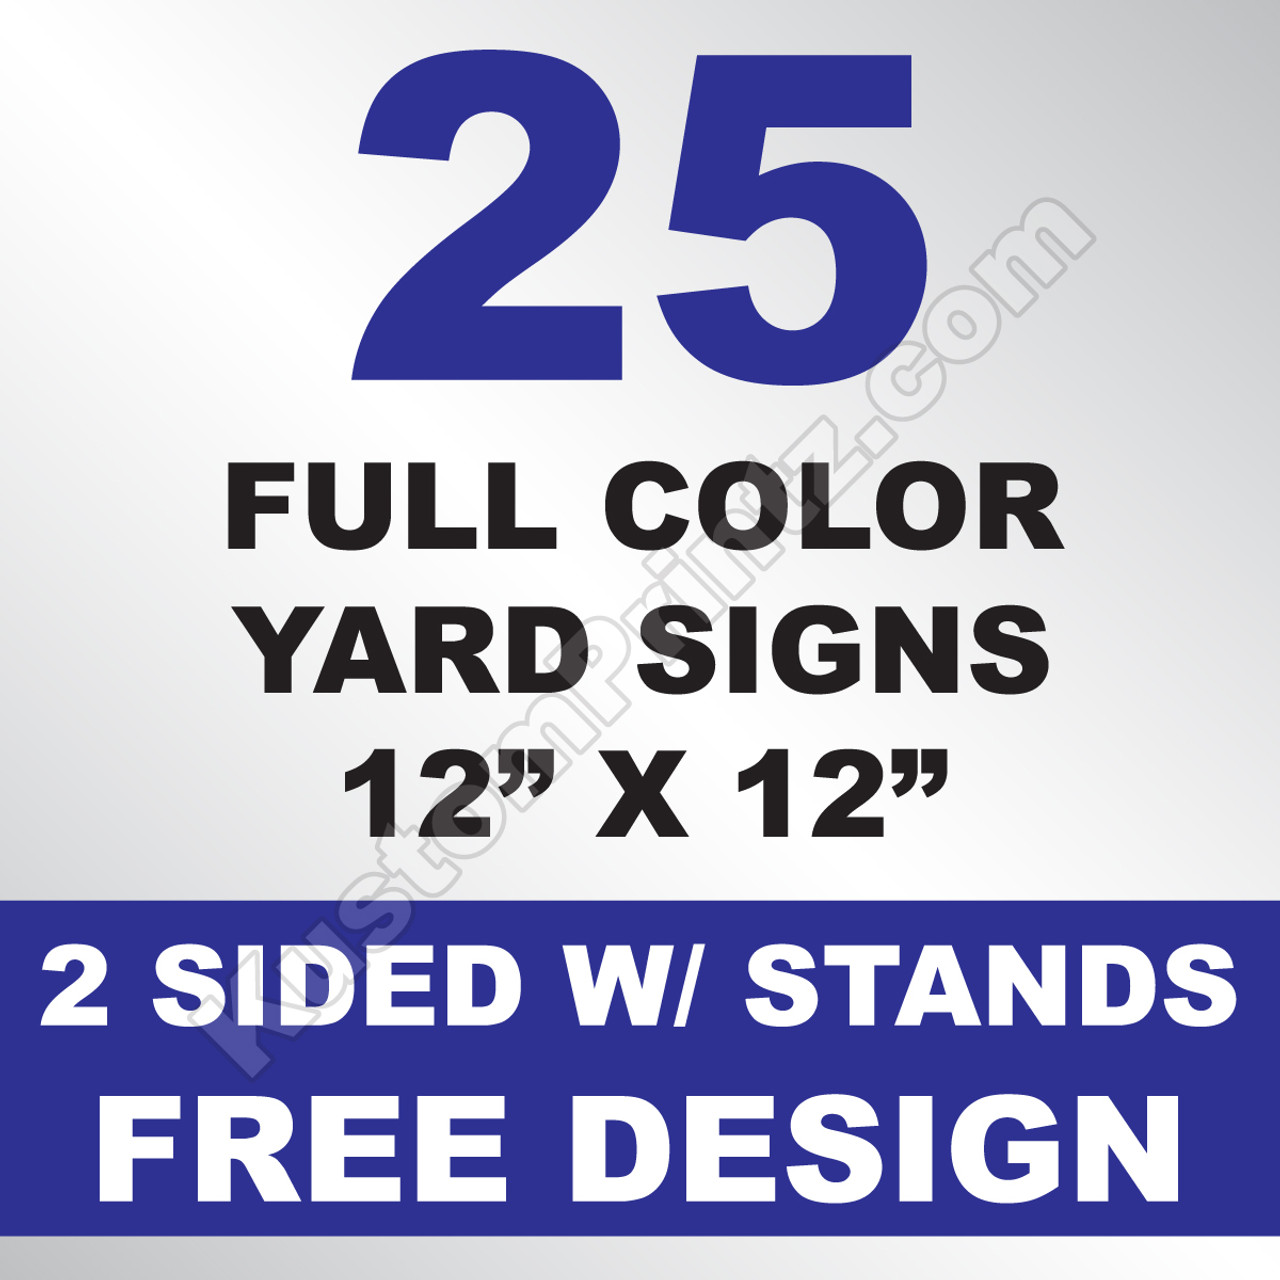 25 Yard Signs 2 Sided w/ Stands 12x12